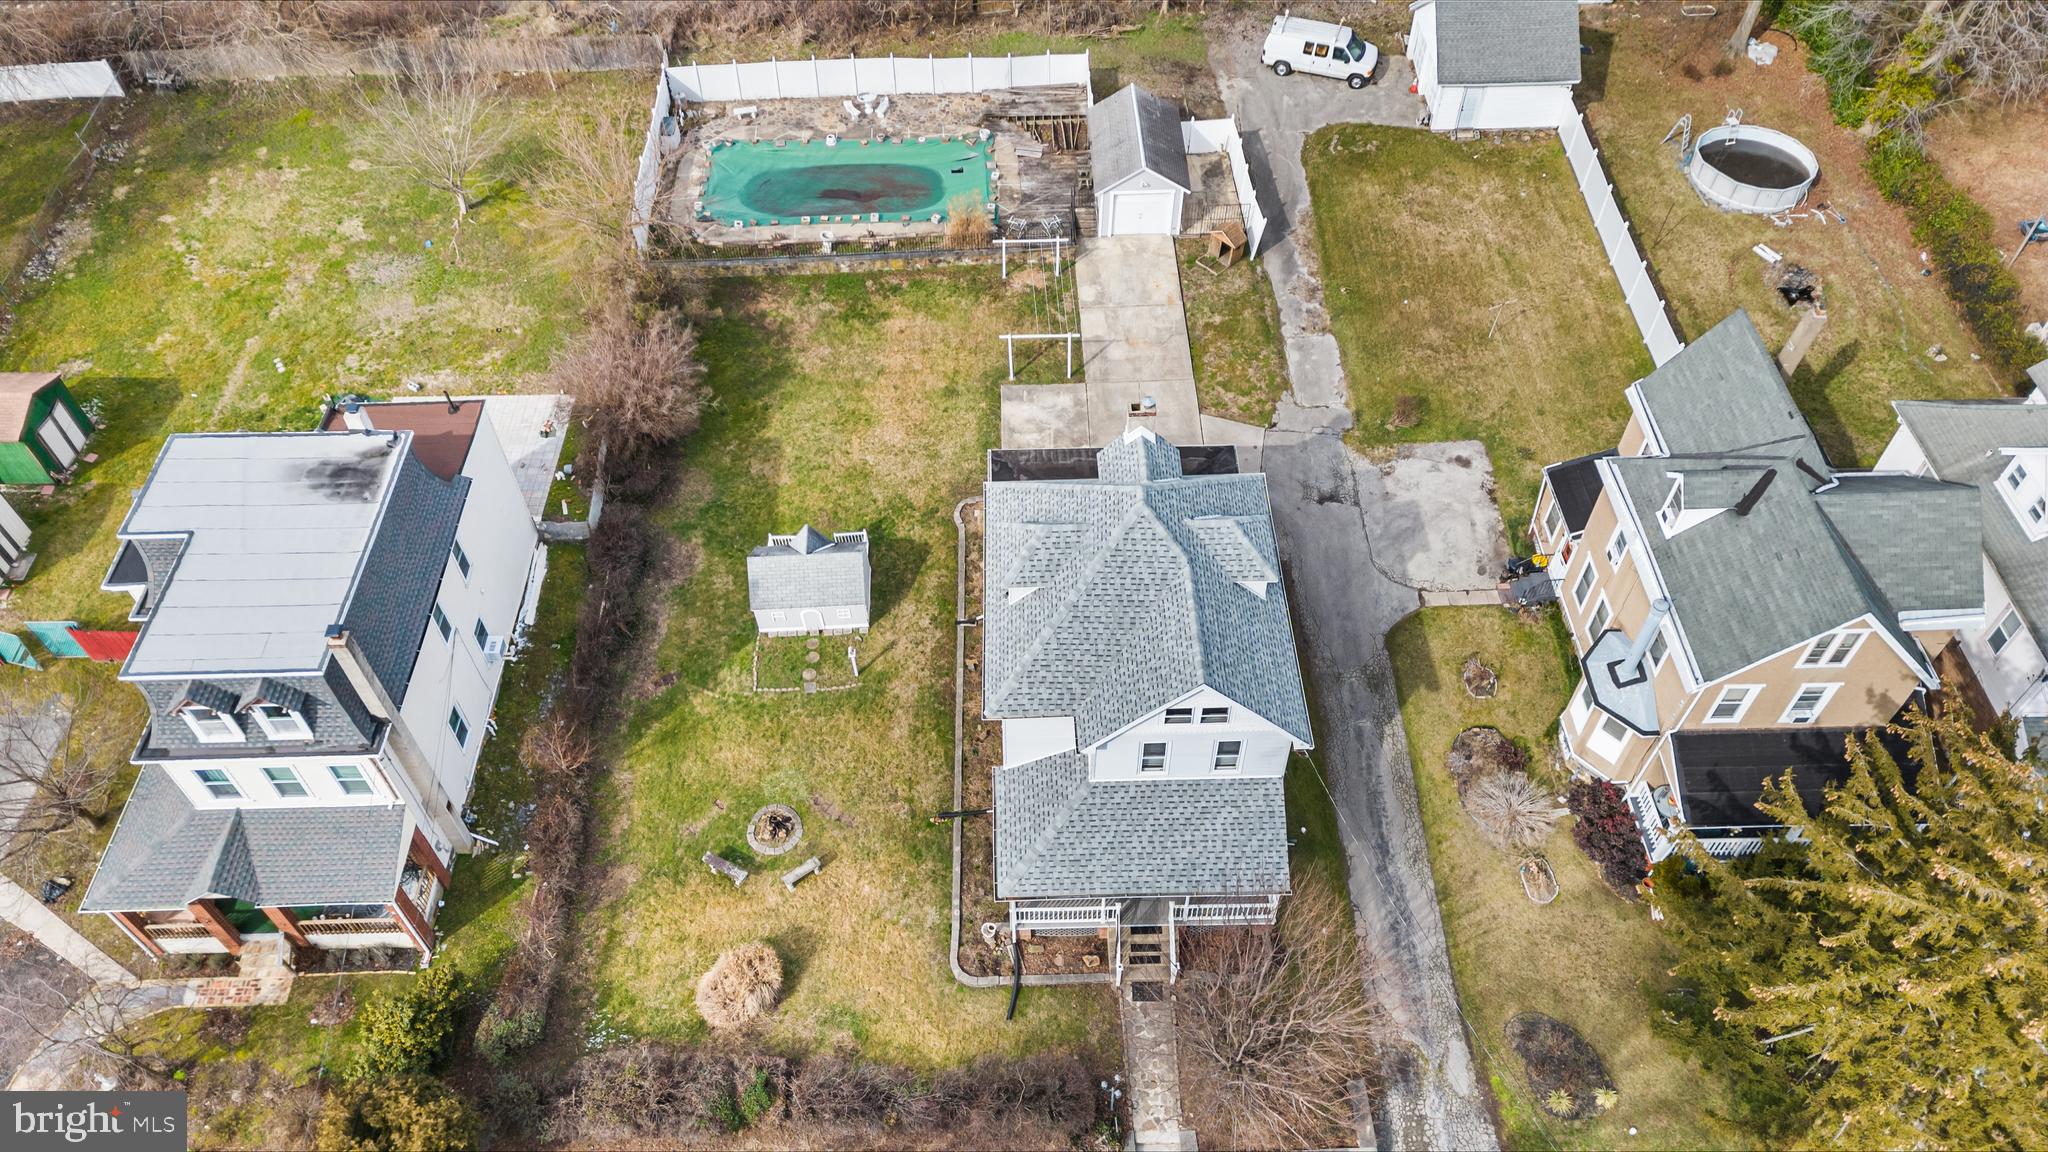 an aerial view of residential house with outdoor space and parking